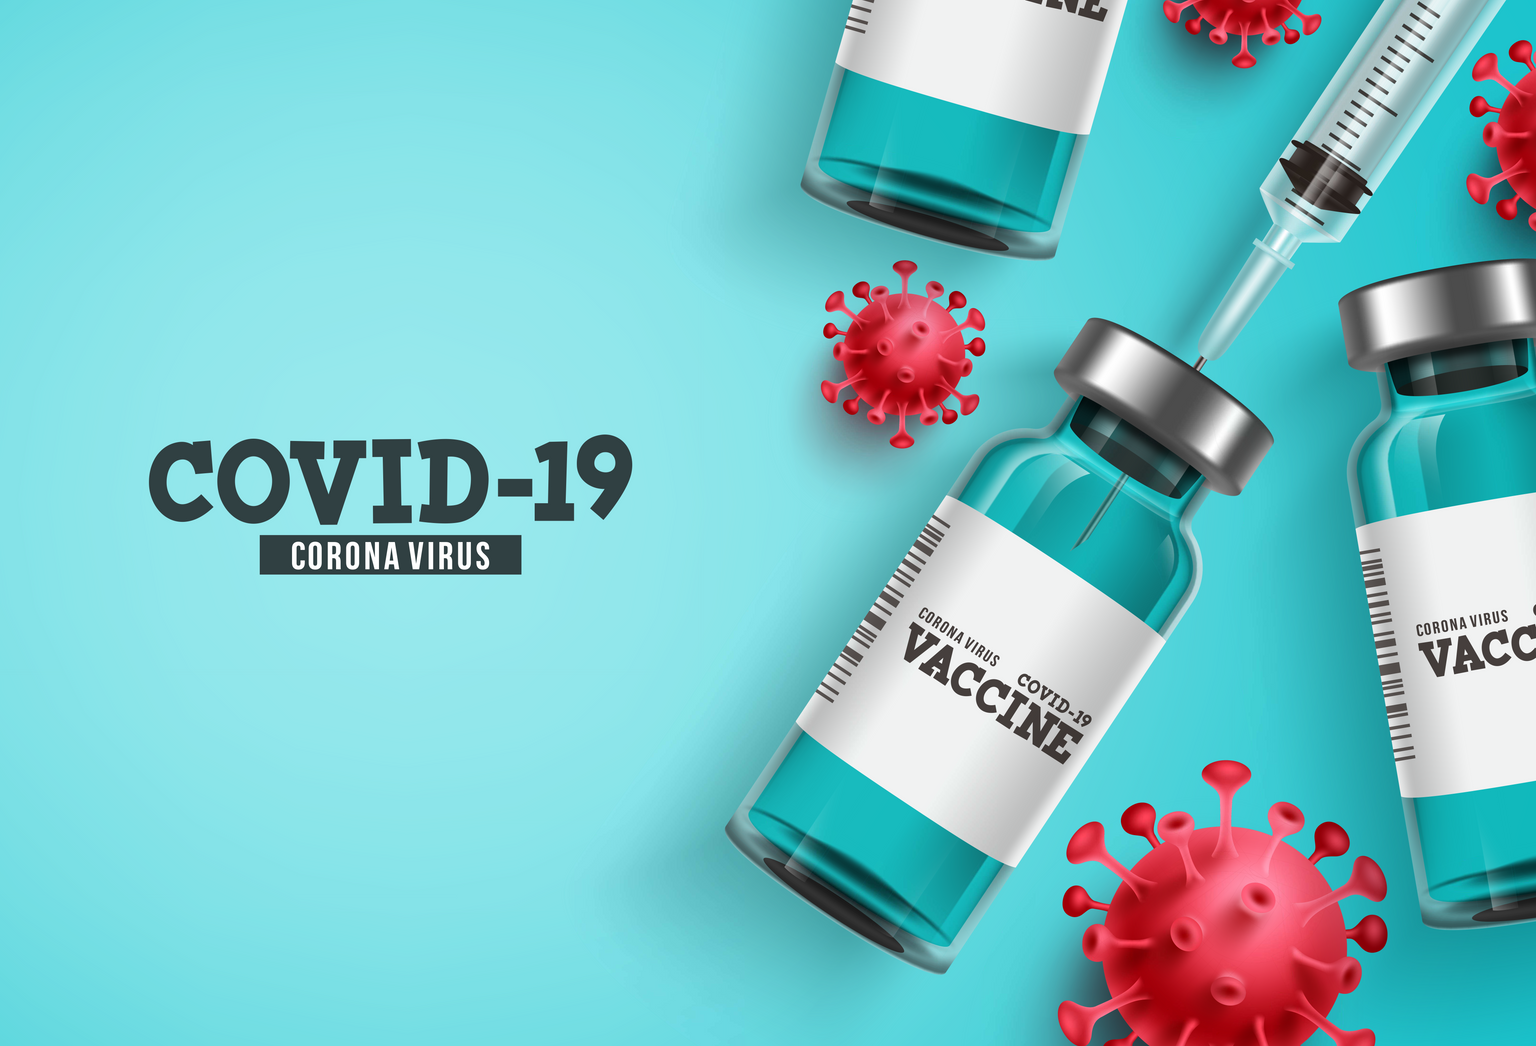 Covid-19 corona virus vaccine background with vaccine bottle and syringe injection tool for Covid19 vaccination. Vector illustration.